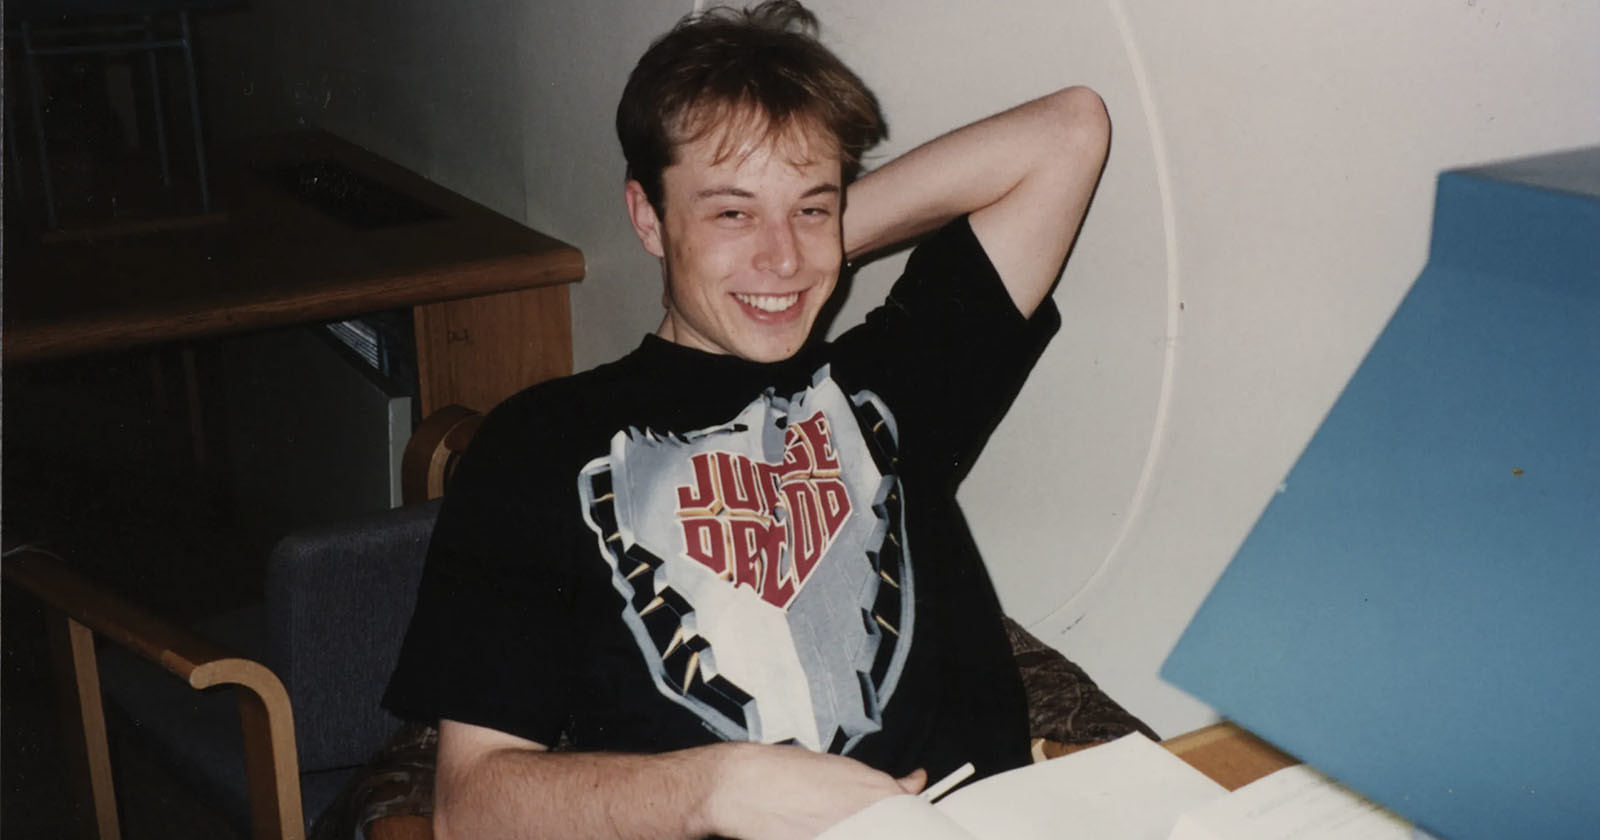 Elon Musks Ex is Selling Photos of Him from His College Days